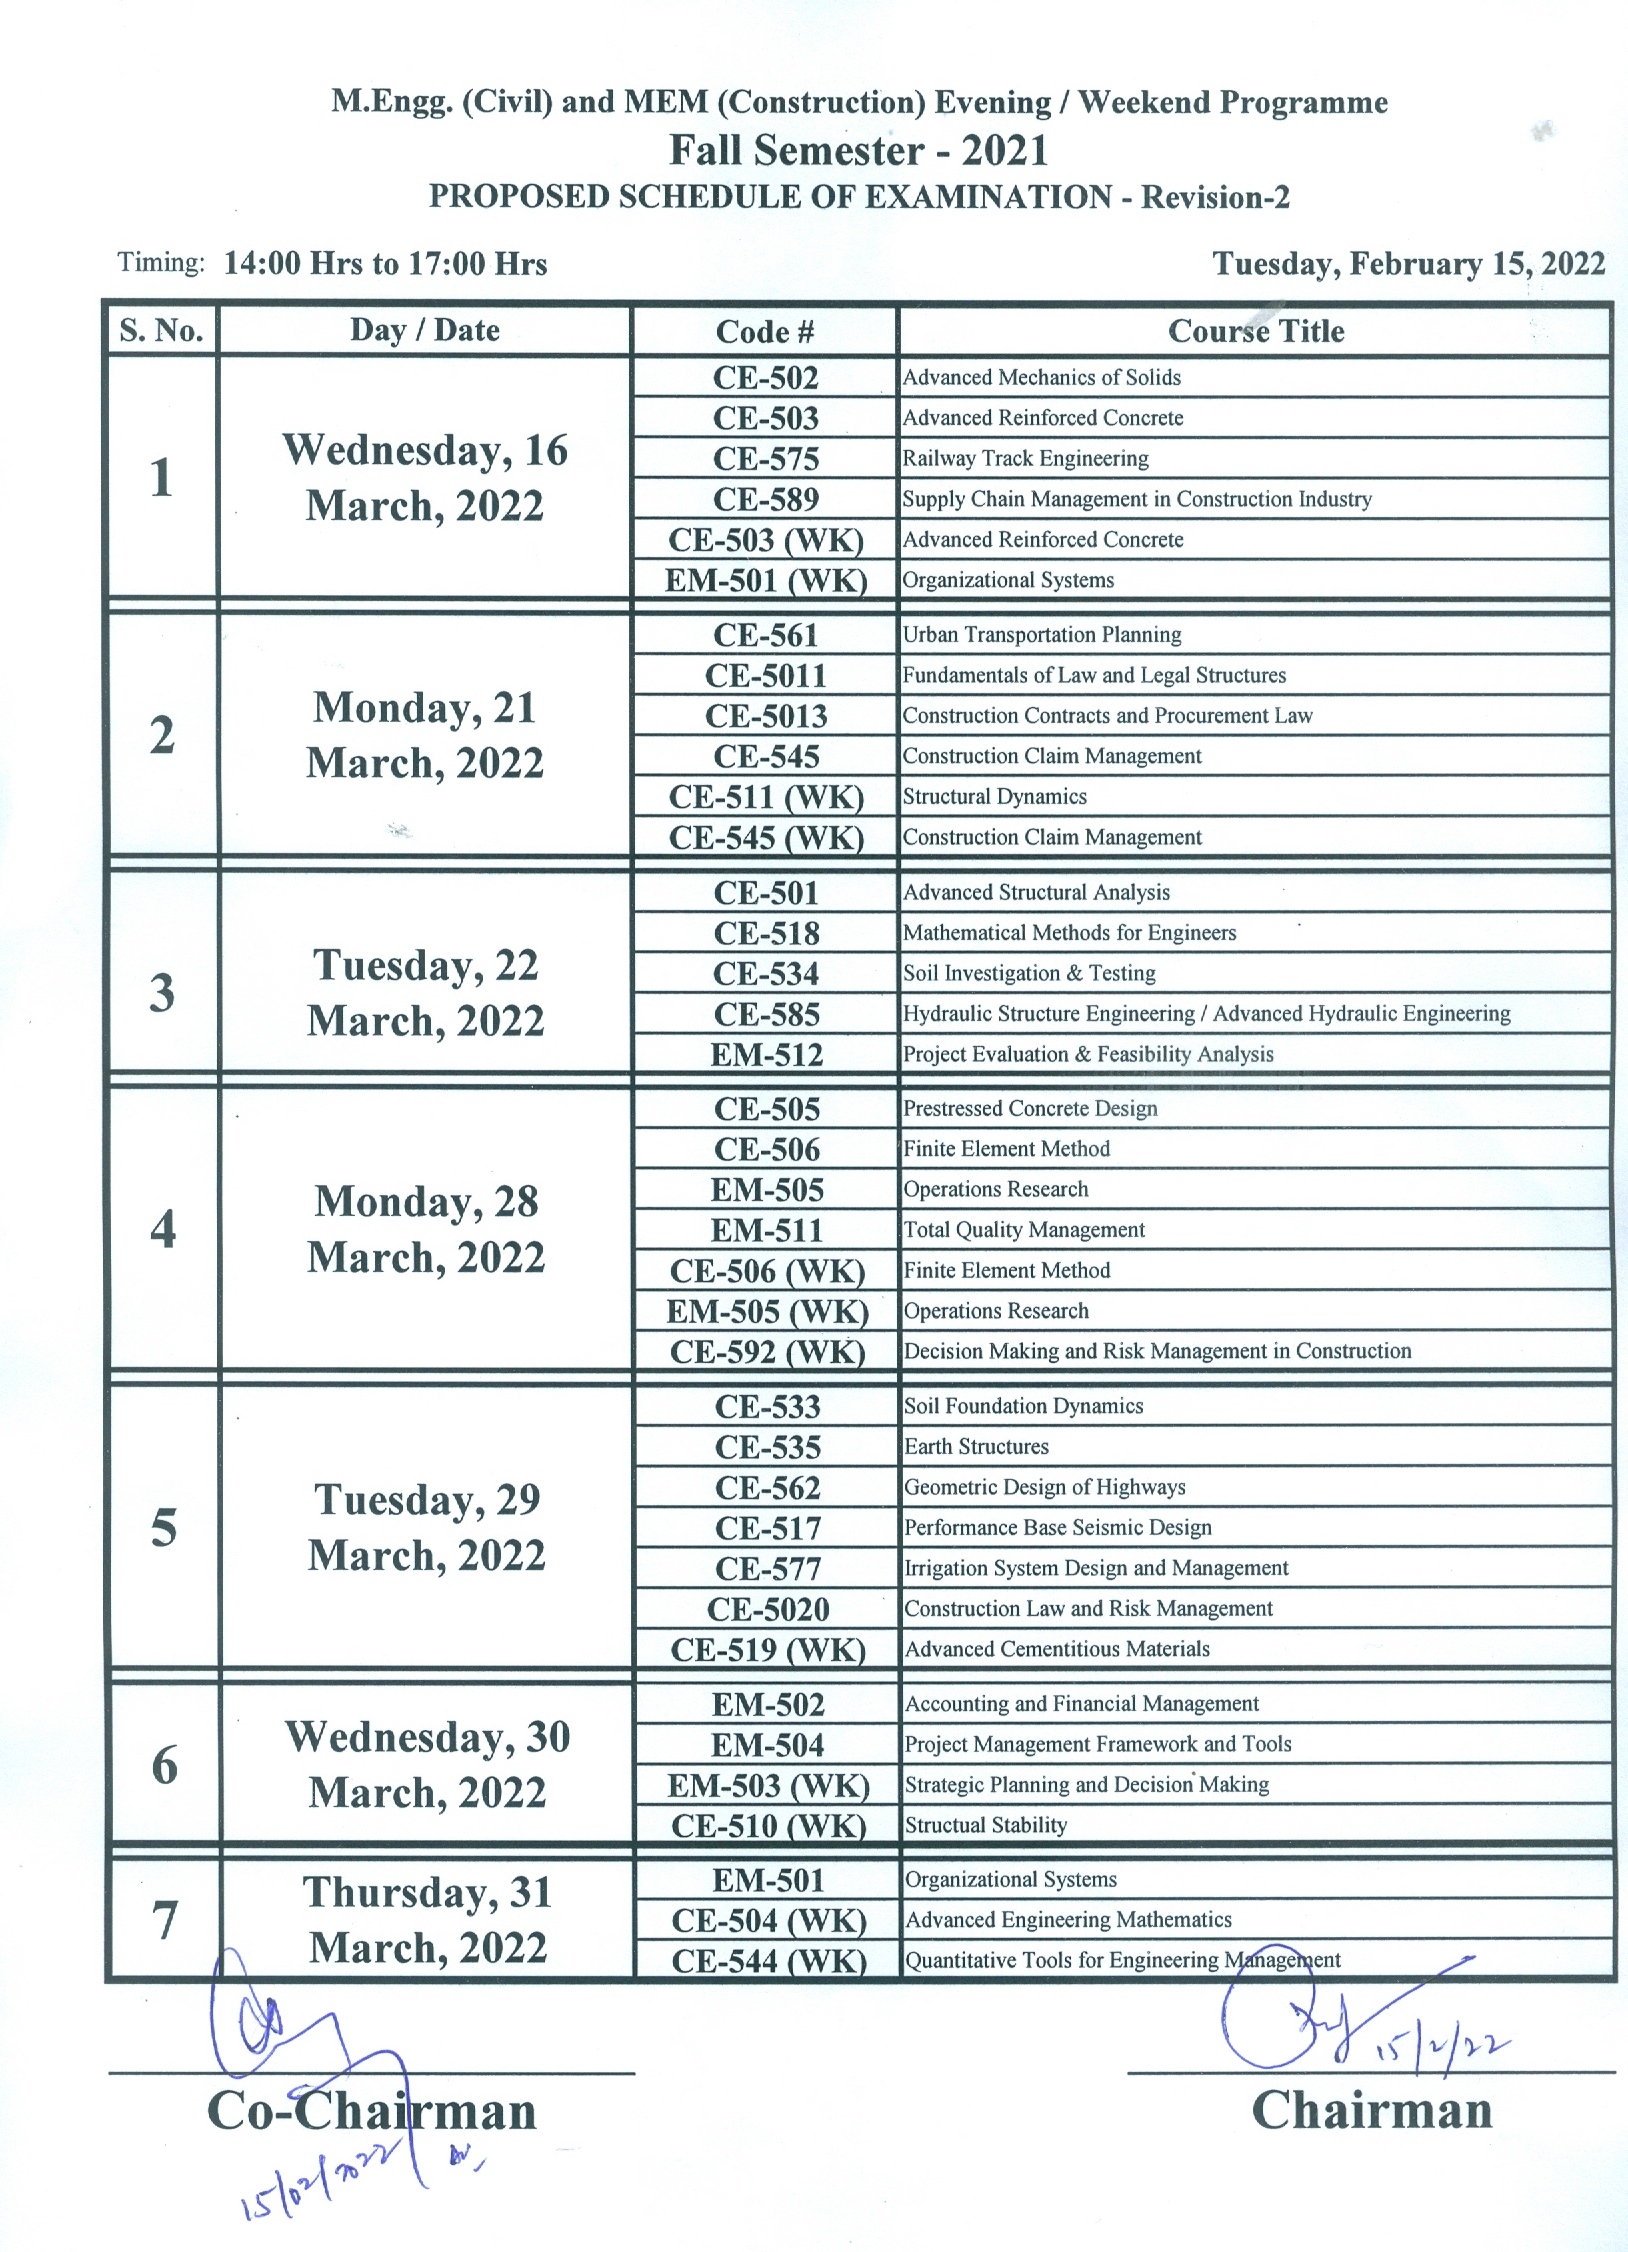 Proposed Schedule of Examination for Fall Semester 2021, M.Engg.(Civil